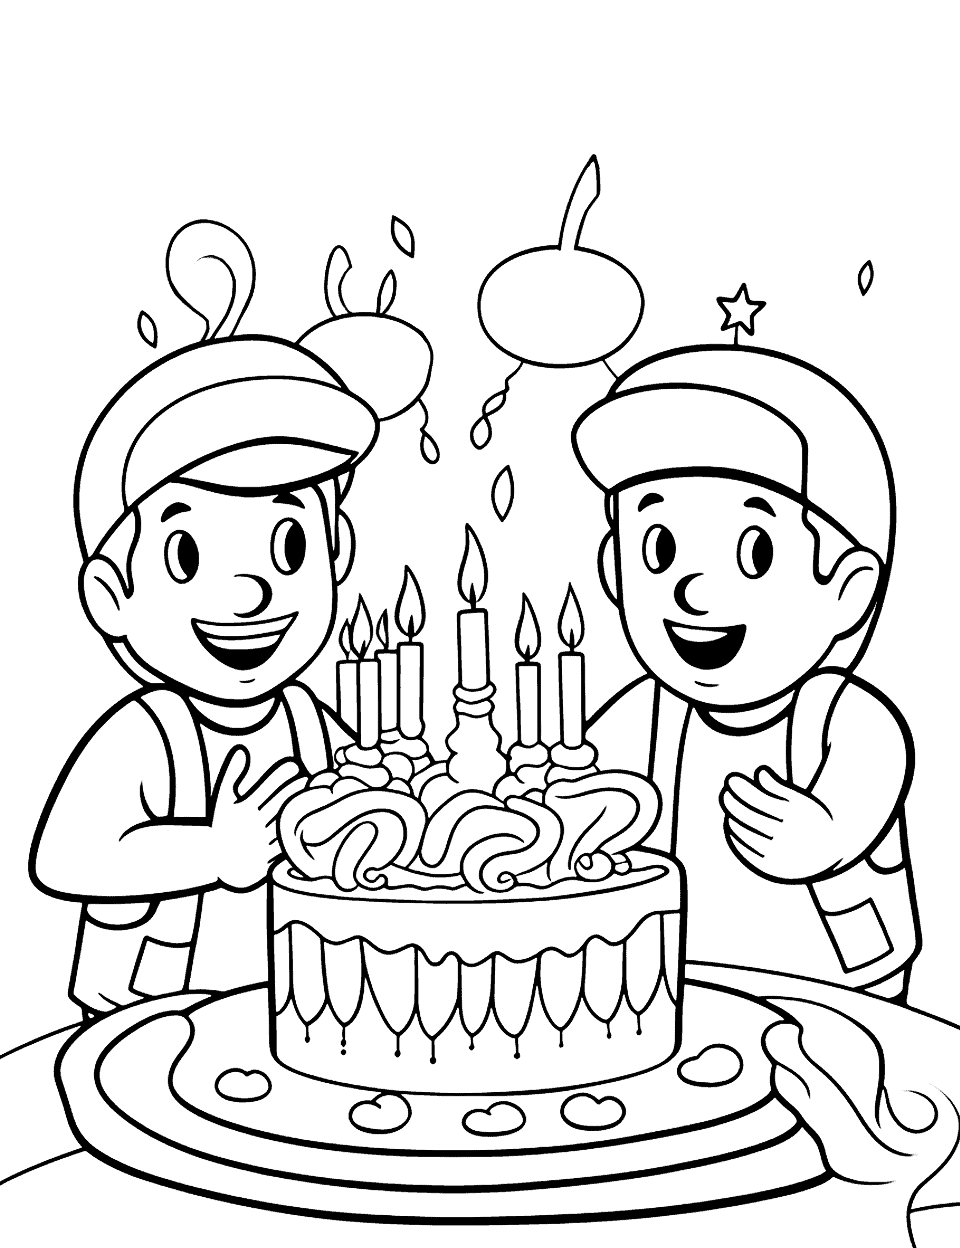 Super Mario Brothers Birthday Happy Coloring Page - Realistic Mario and Luigi blowing out candles on a power-up cake.